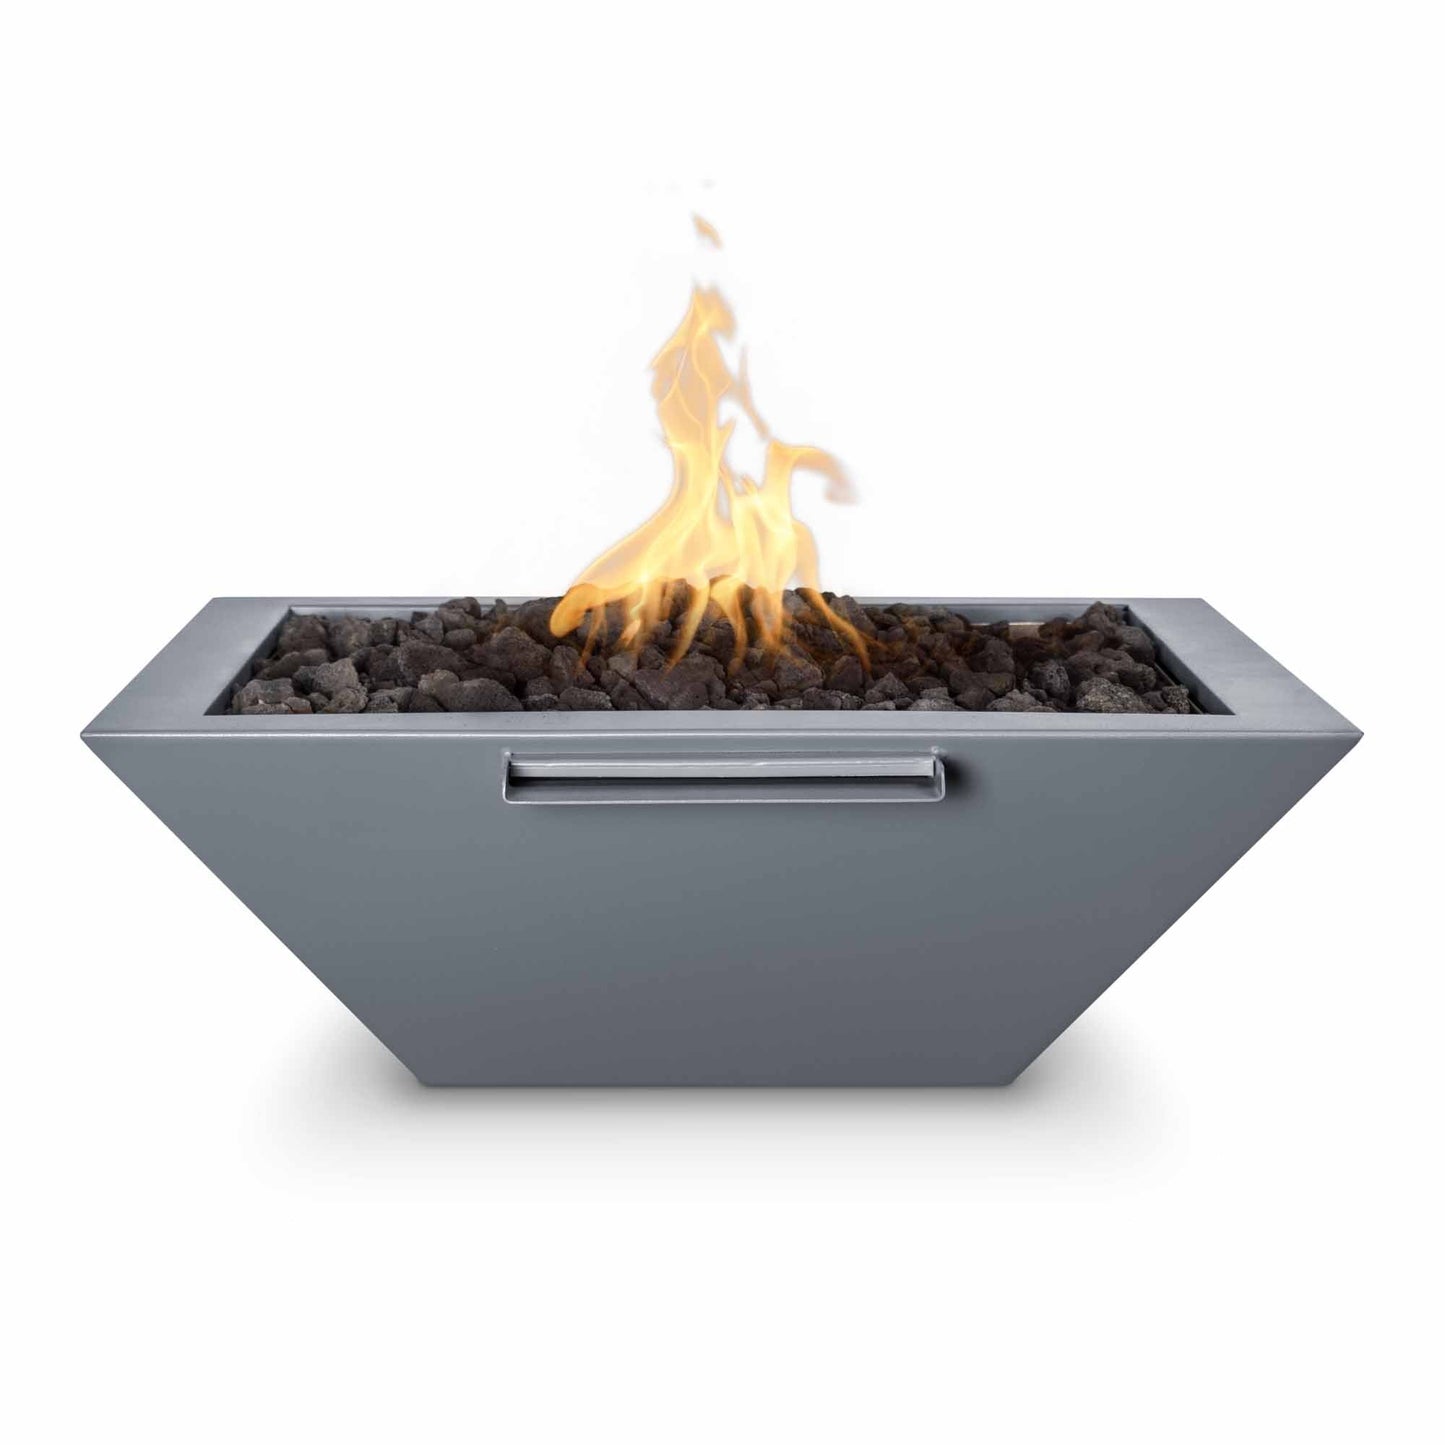 The Outdoor Plus Square Maya 24" Java Powder Coated Metal Liquid Propane Fire Bowl with Match Lit with Flame Sense Ignition